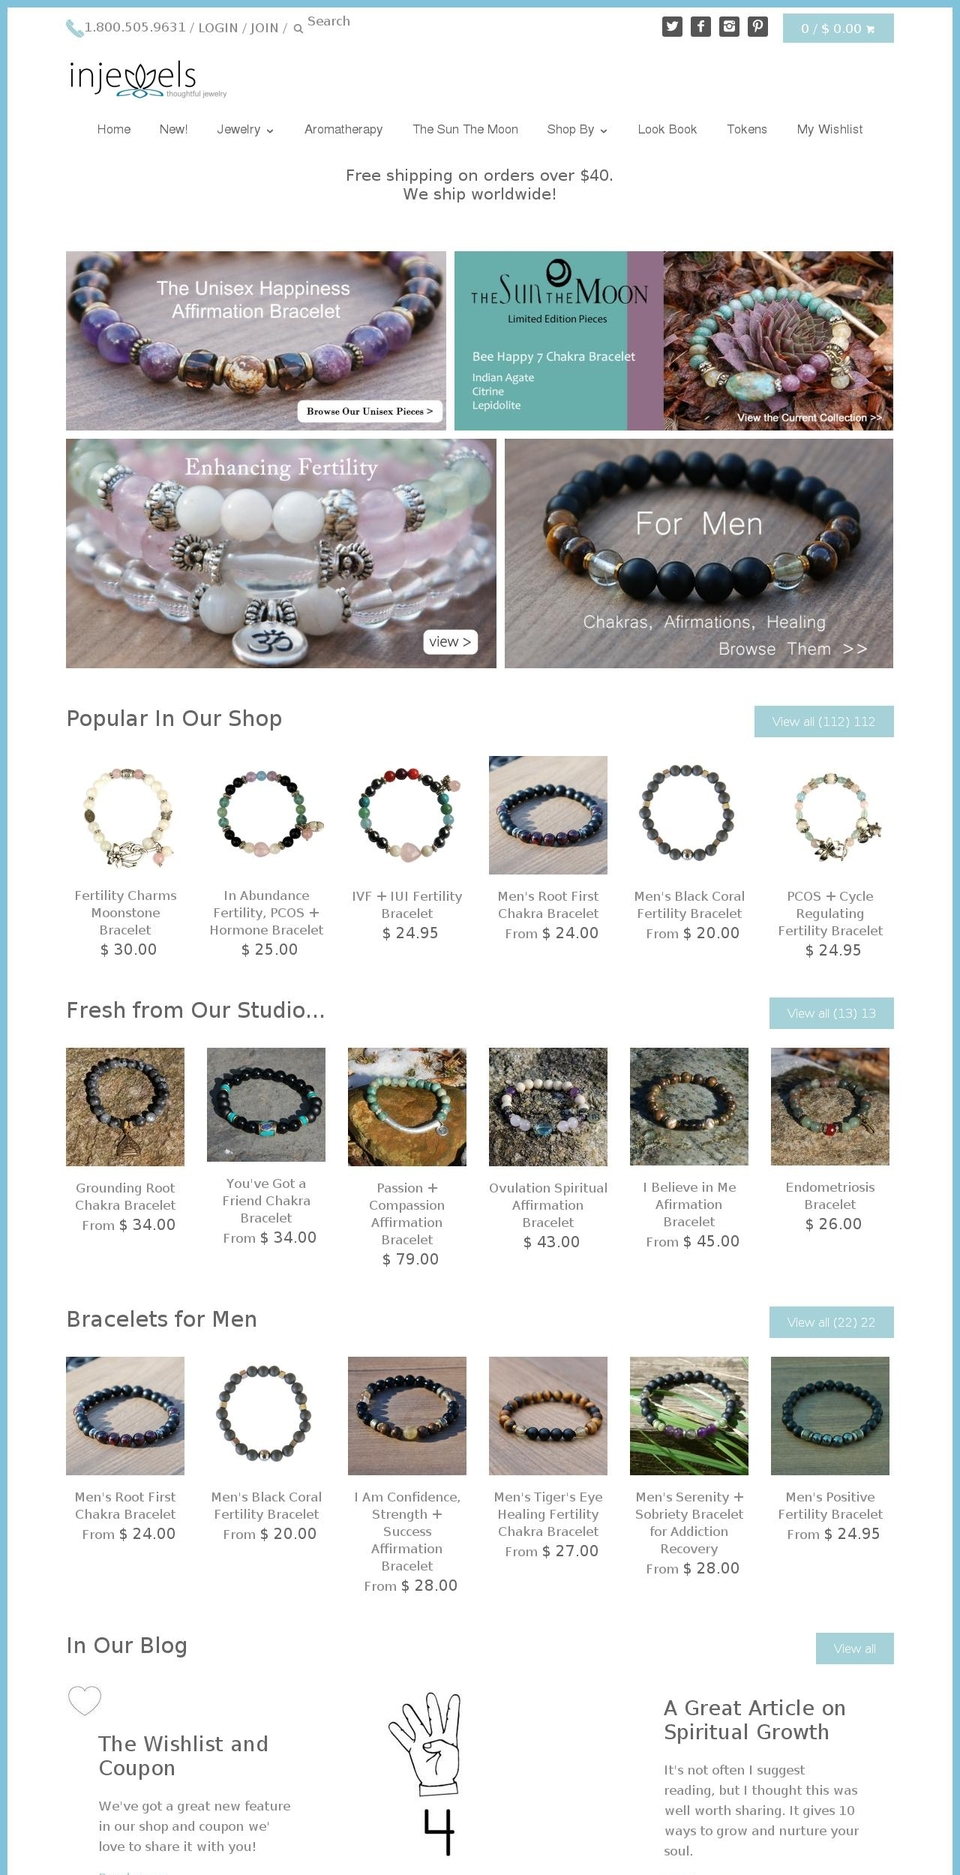 Galleria Shopify theme site example injewels.net